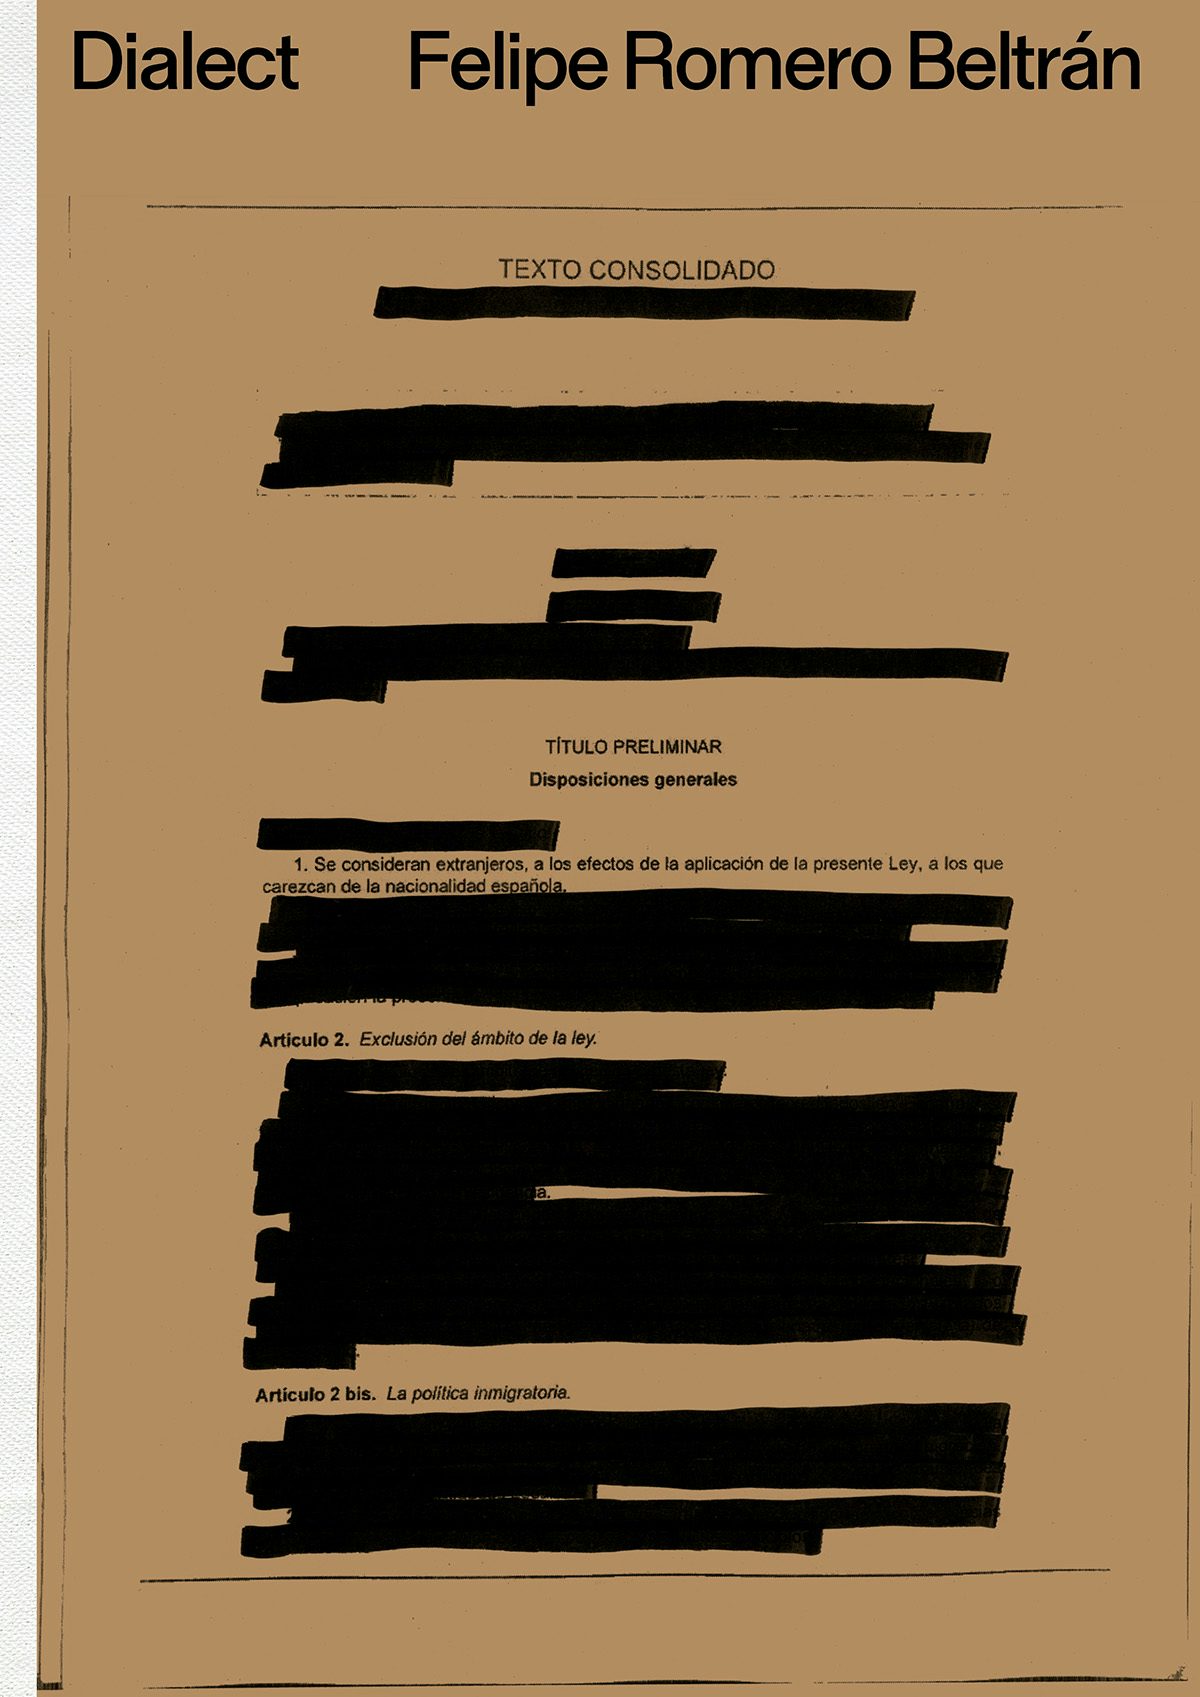 Image of the cover of Dialect by Felipe Romero Beltran, which is a brown background covered with text that has been mostly redacted with black pen